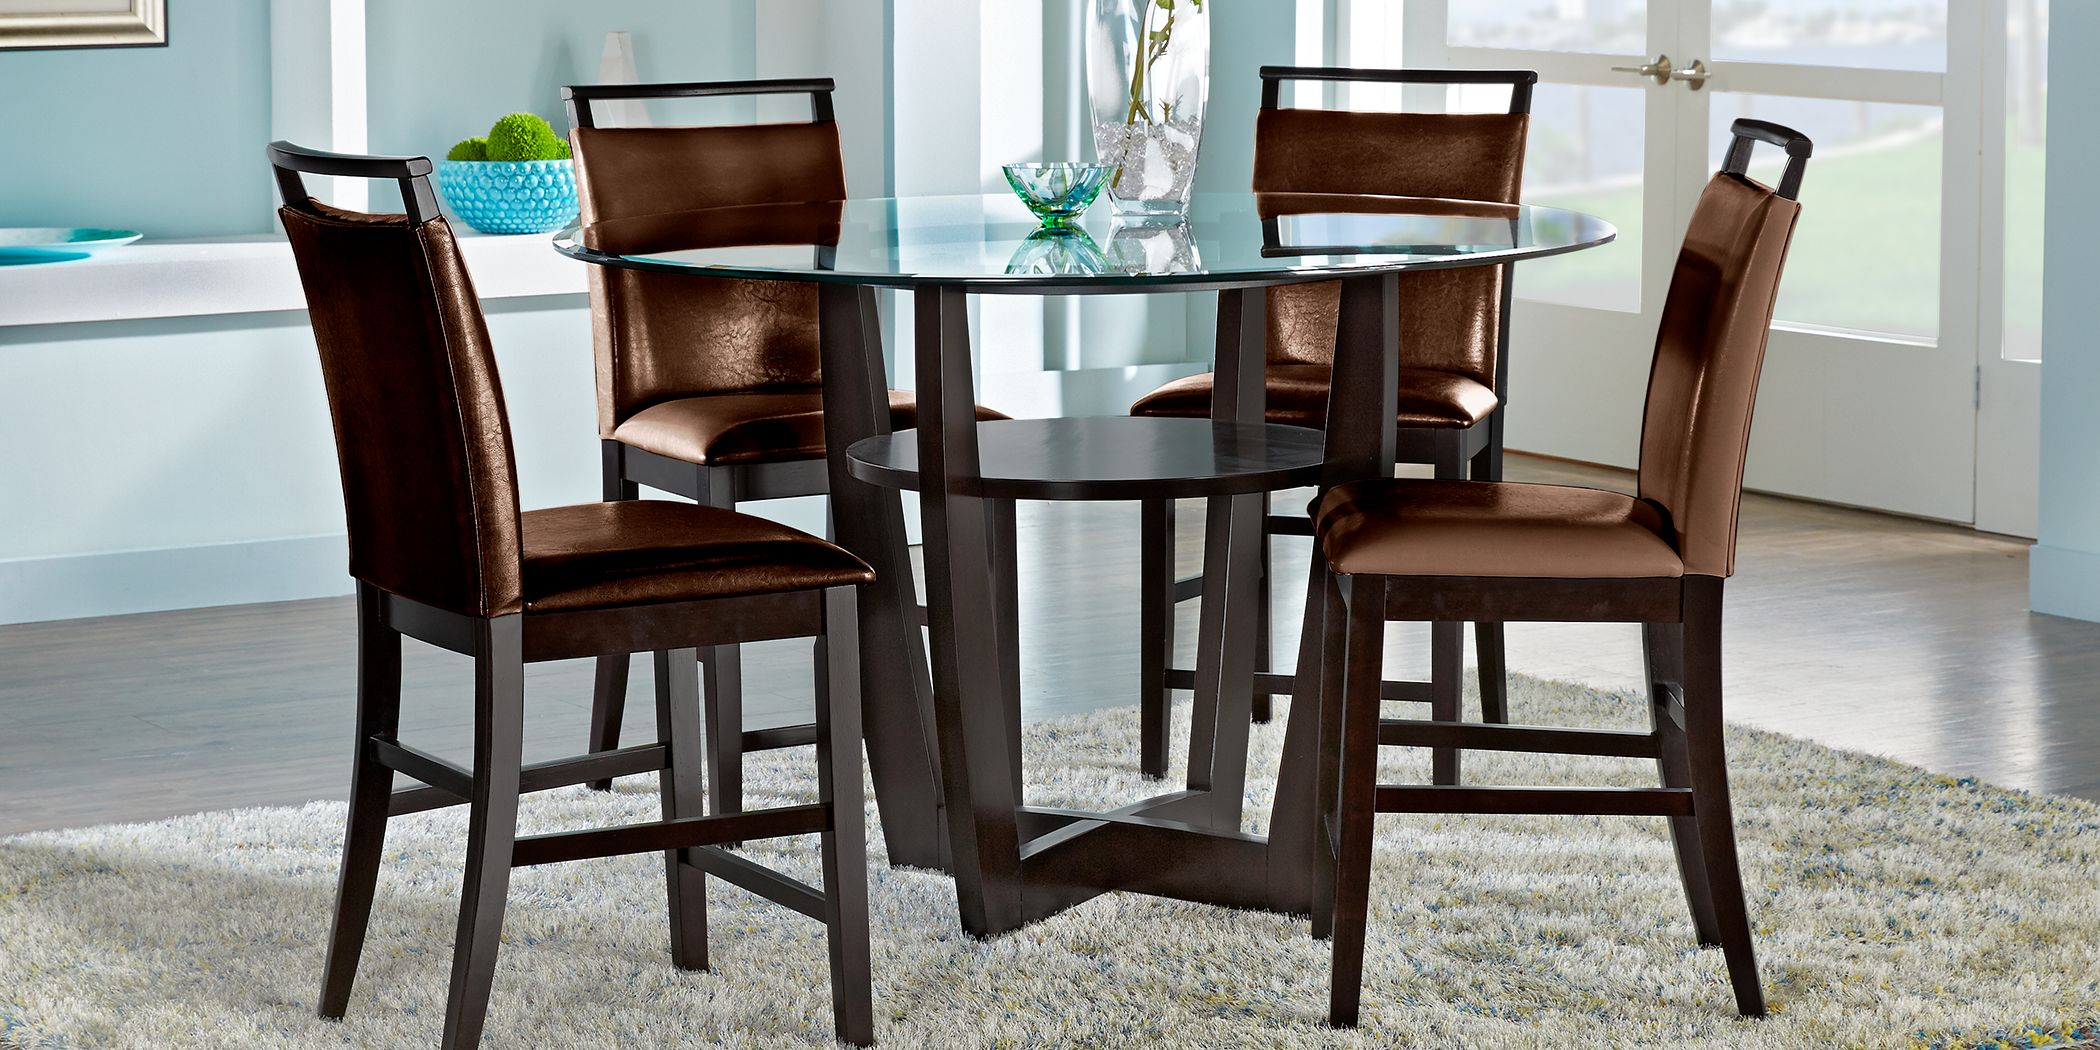 Small Dining Room Sets For Apartments Dorms And Small Spaces